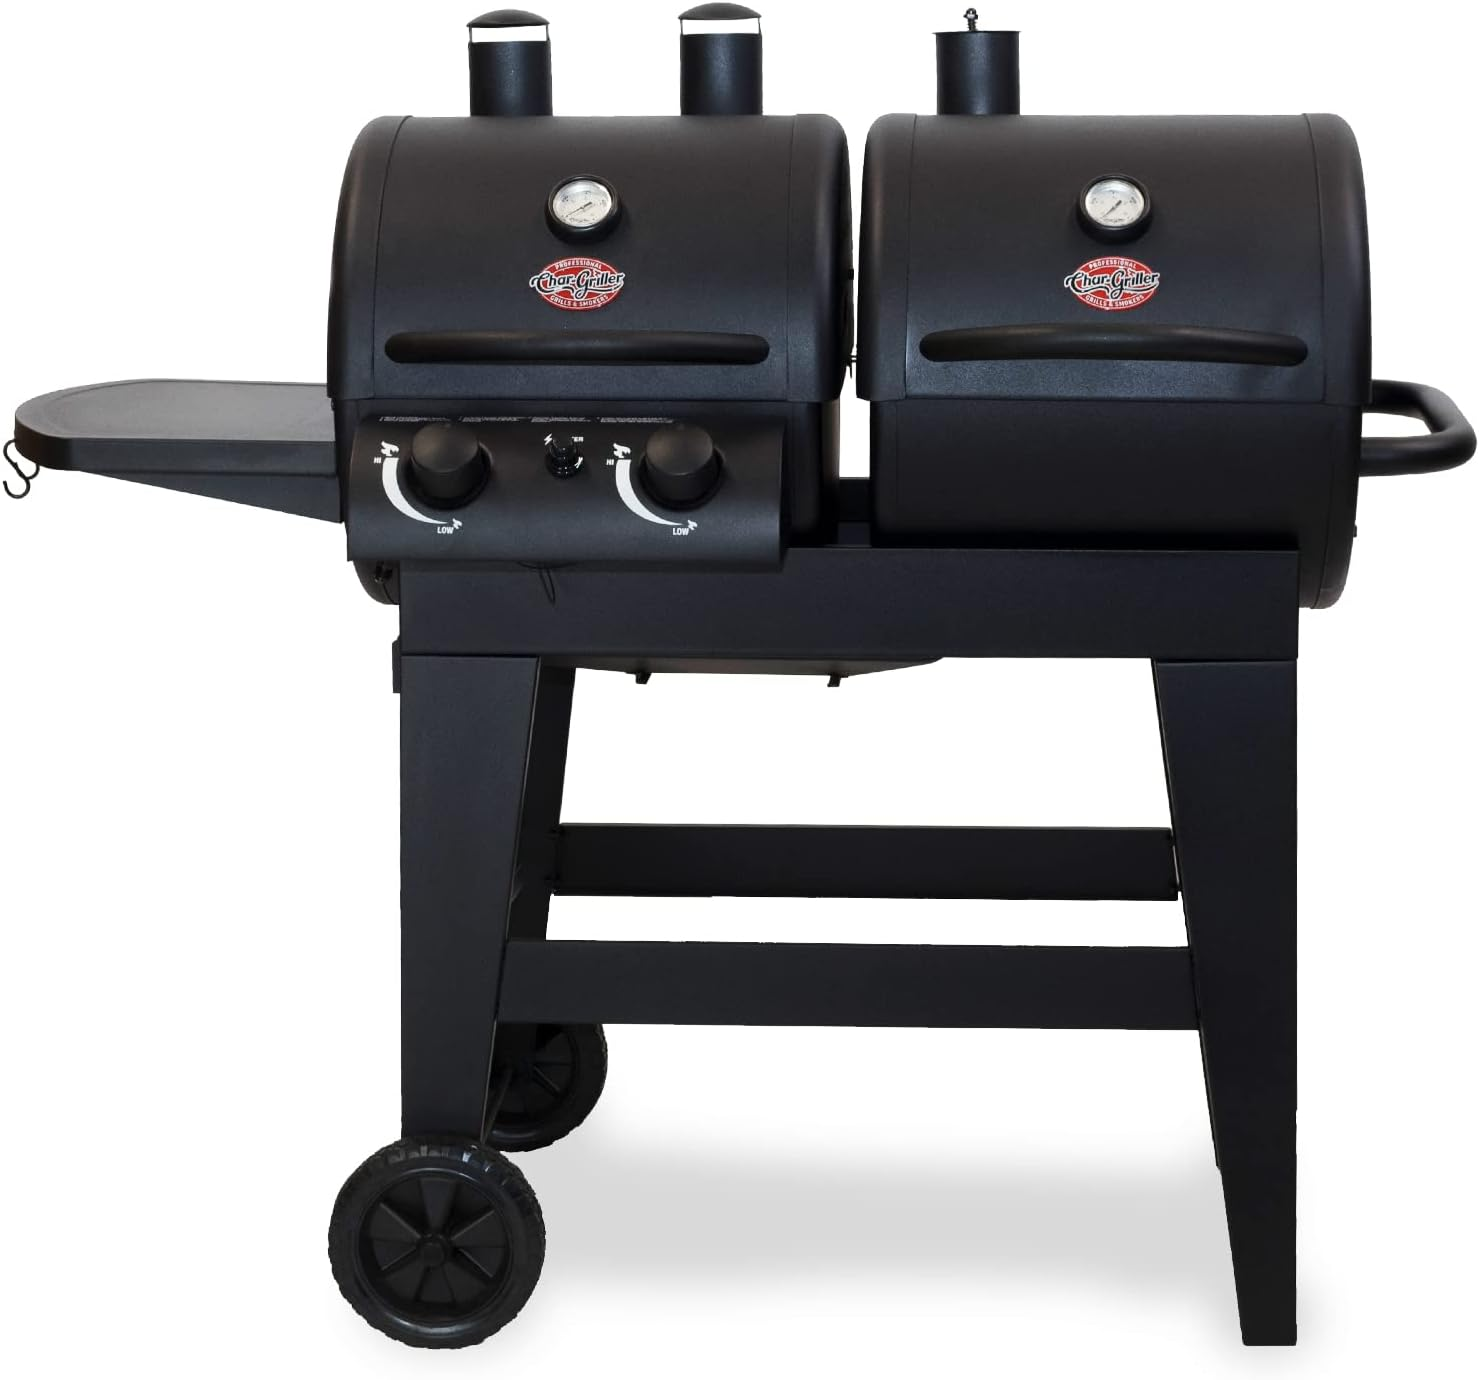 2-Burner Char-Griller E5030 Dual Function Gas & Charcoal Grill $231.99